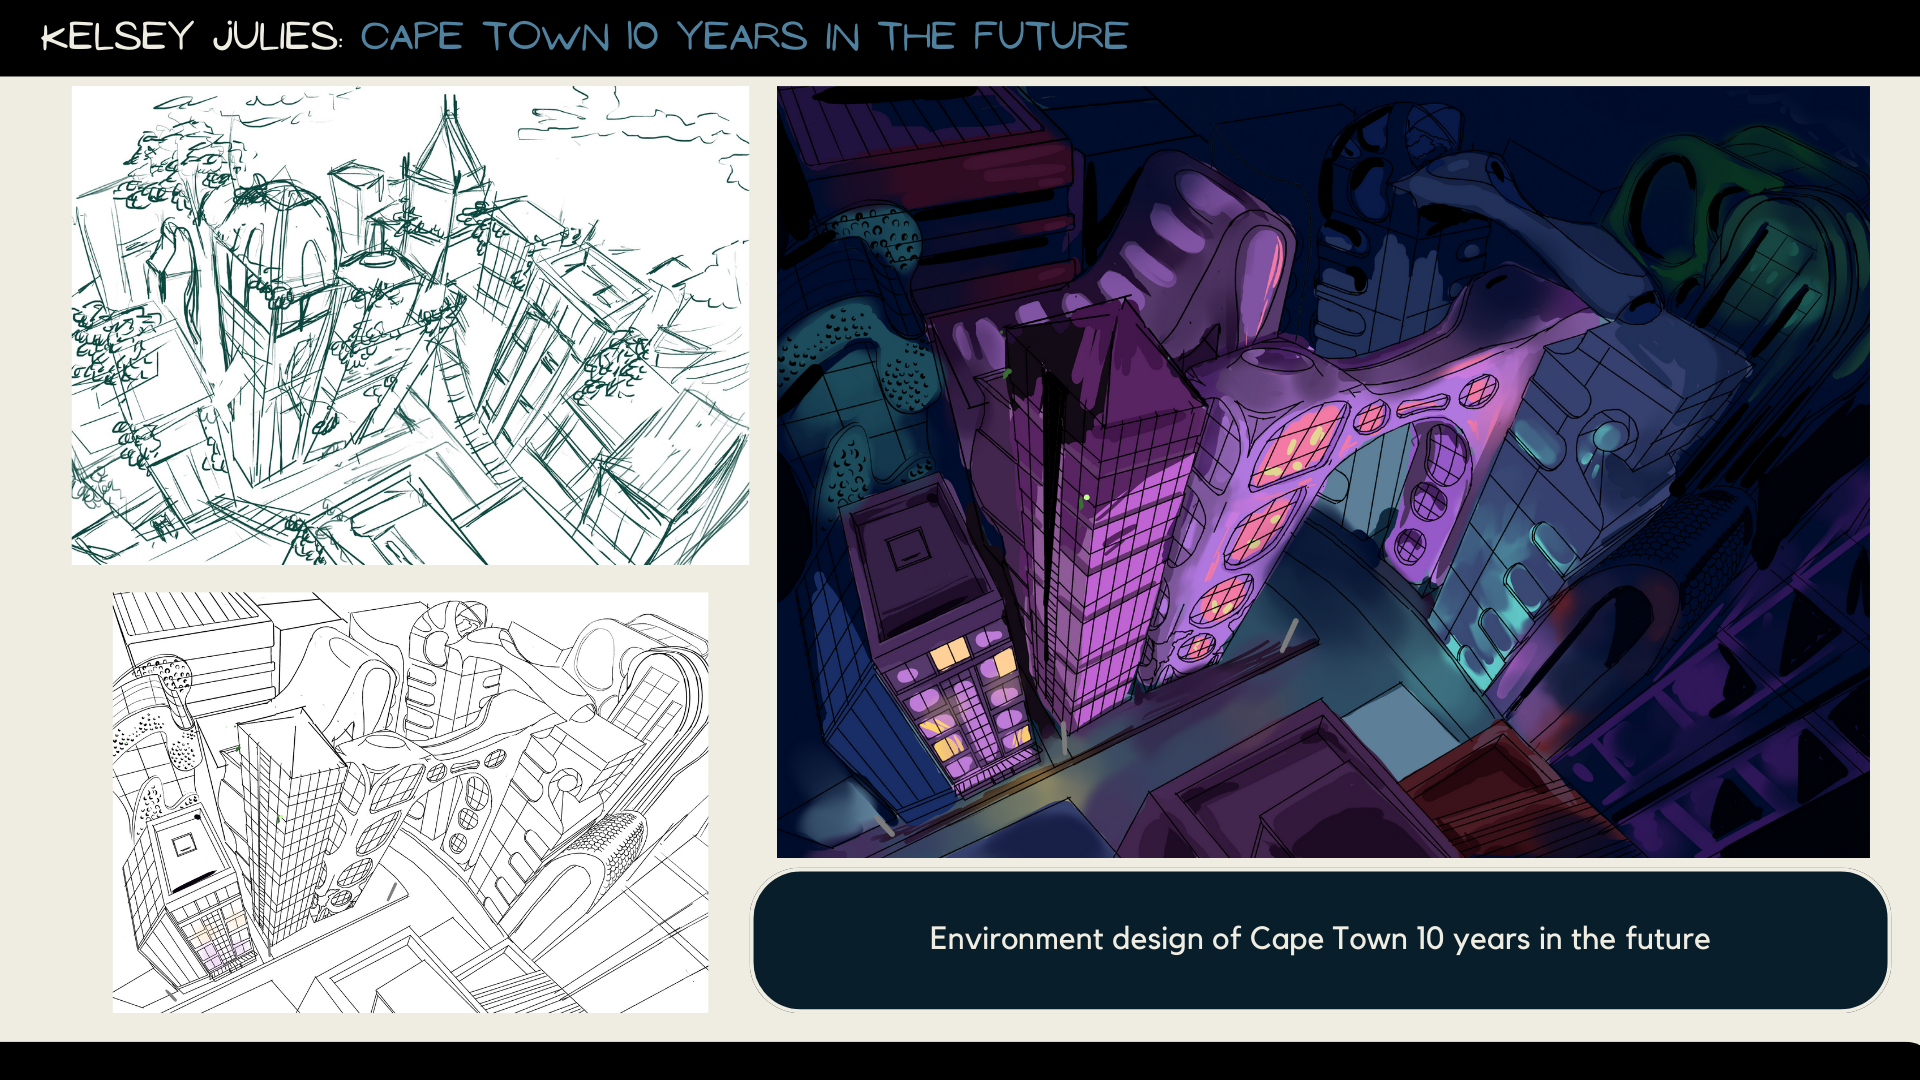 KELSEY JULIES

Environment design of Cape Town 10 years in the future